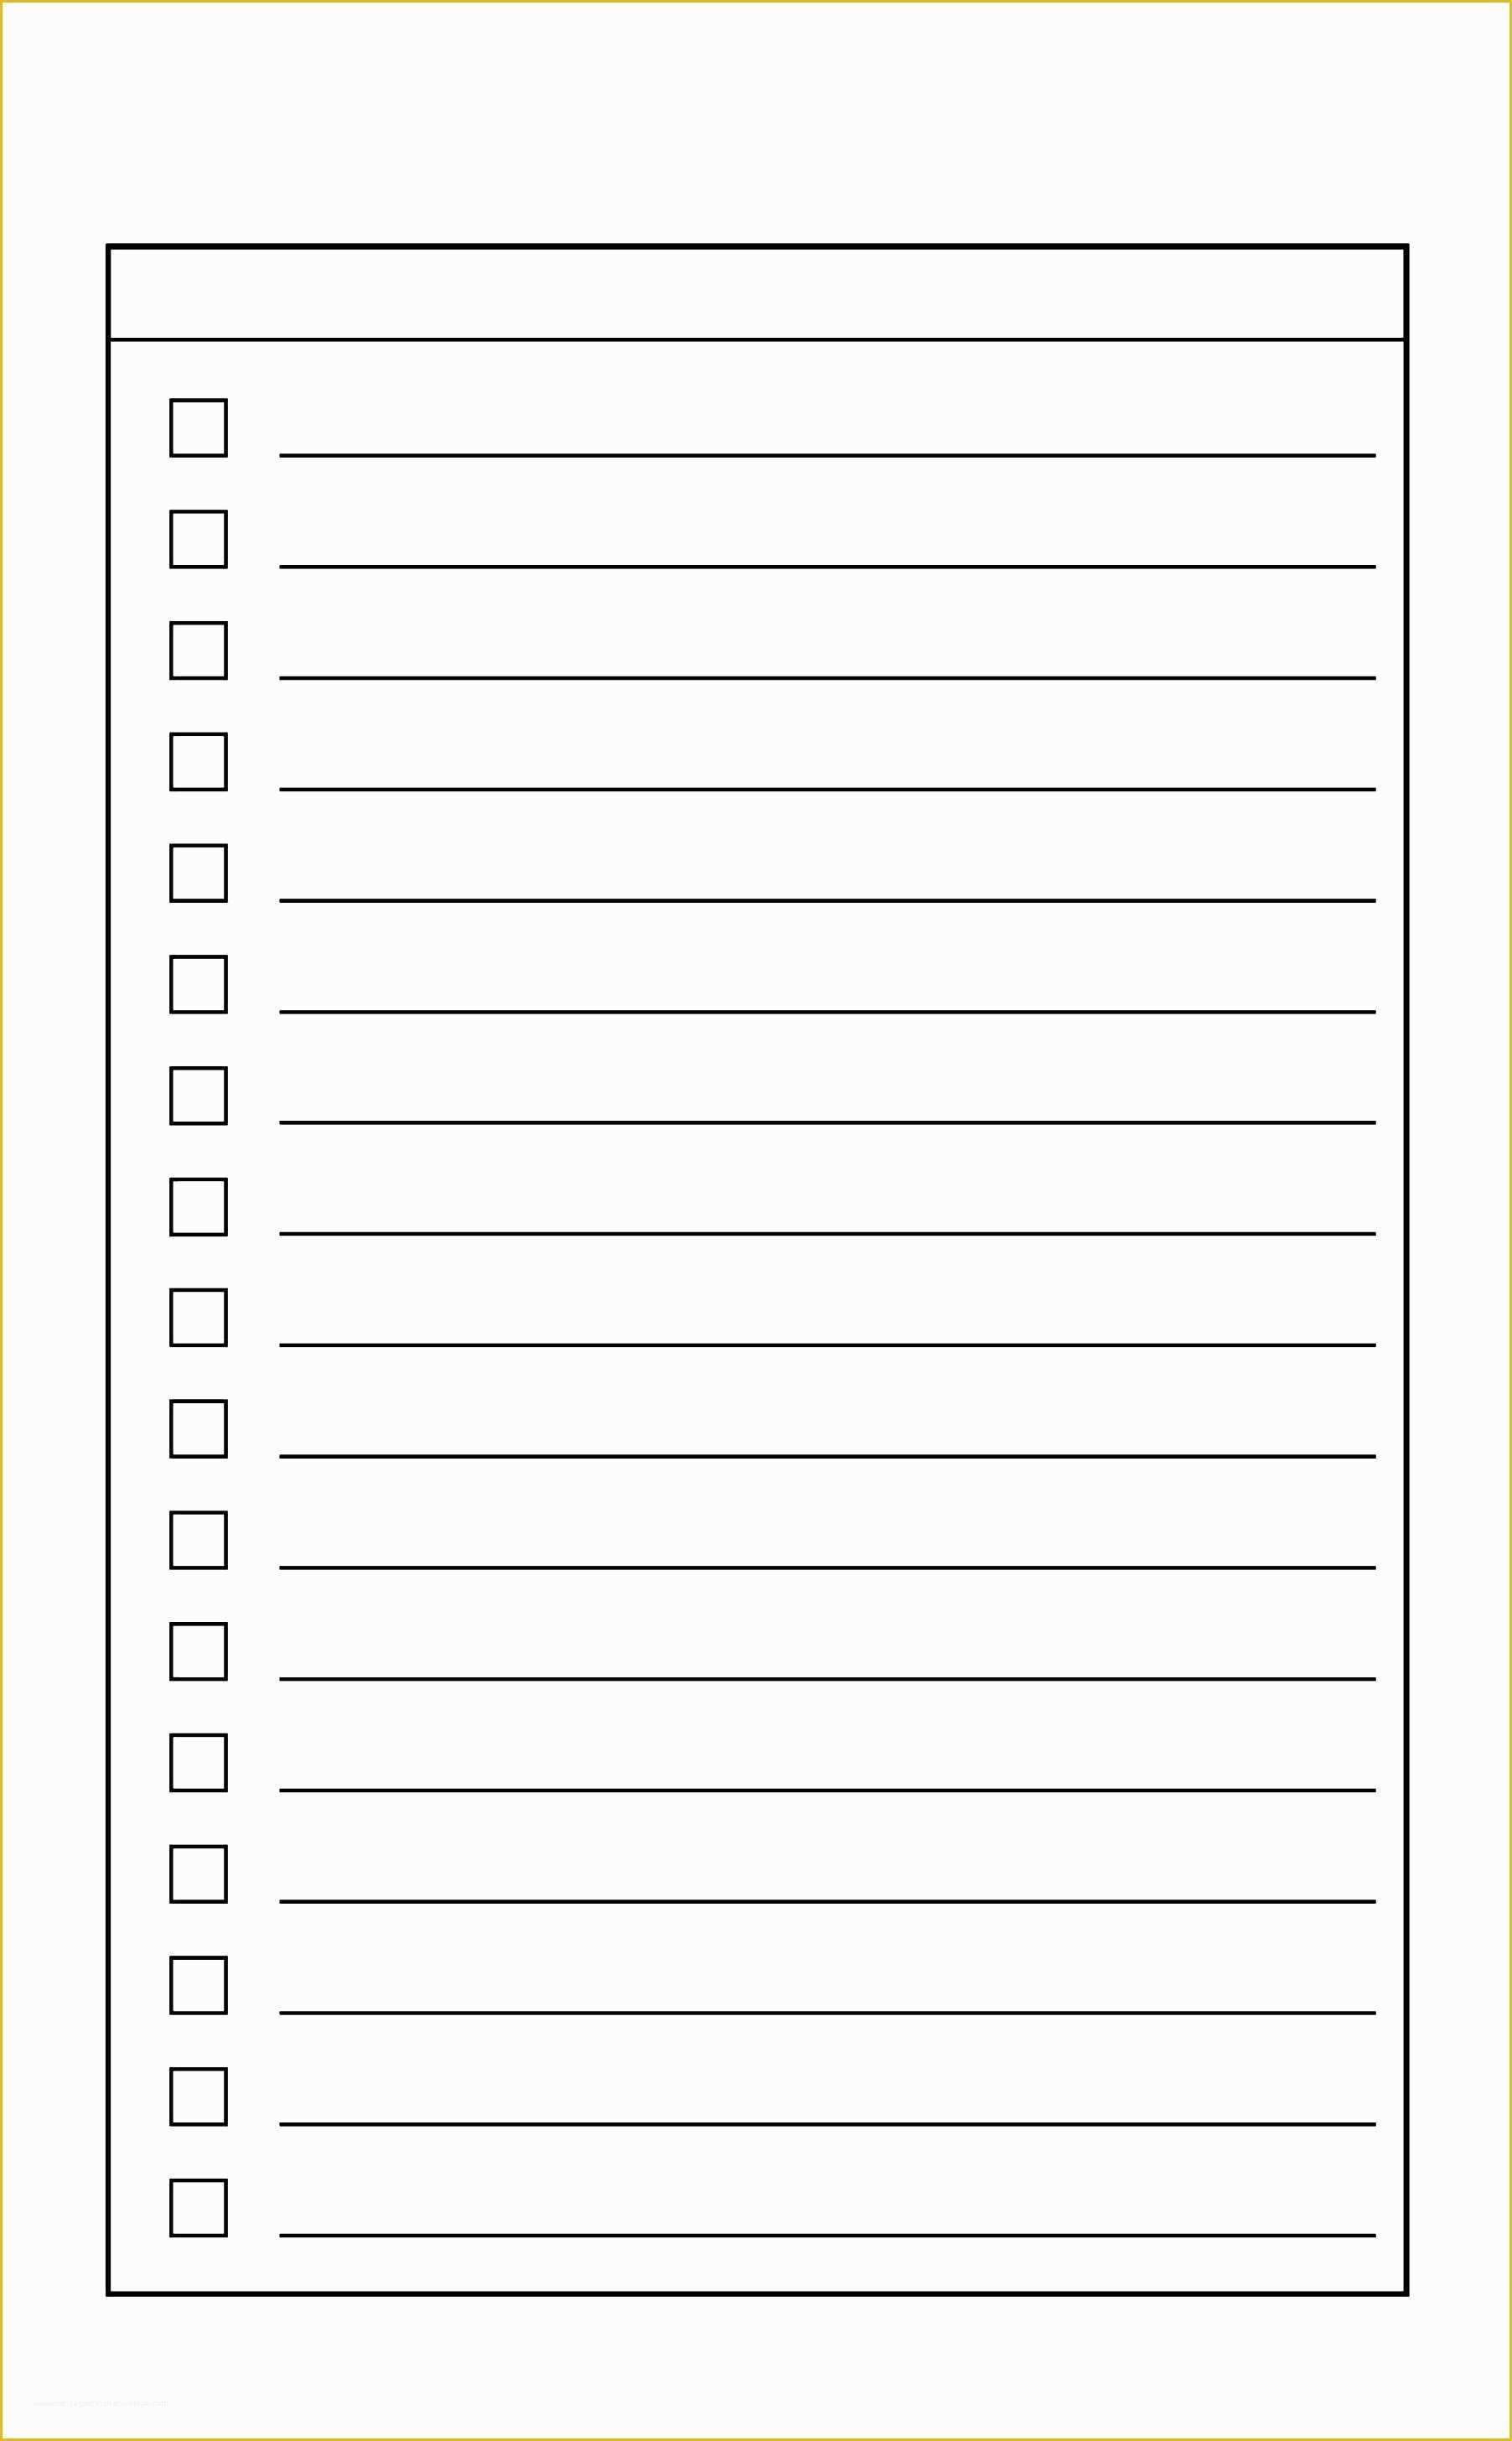 hairstyle-to-do-sheet-template-templates-printable-free-to-do-lists